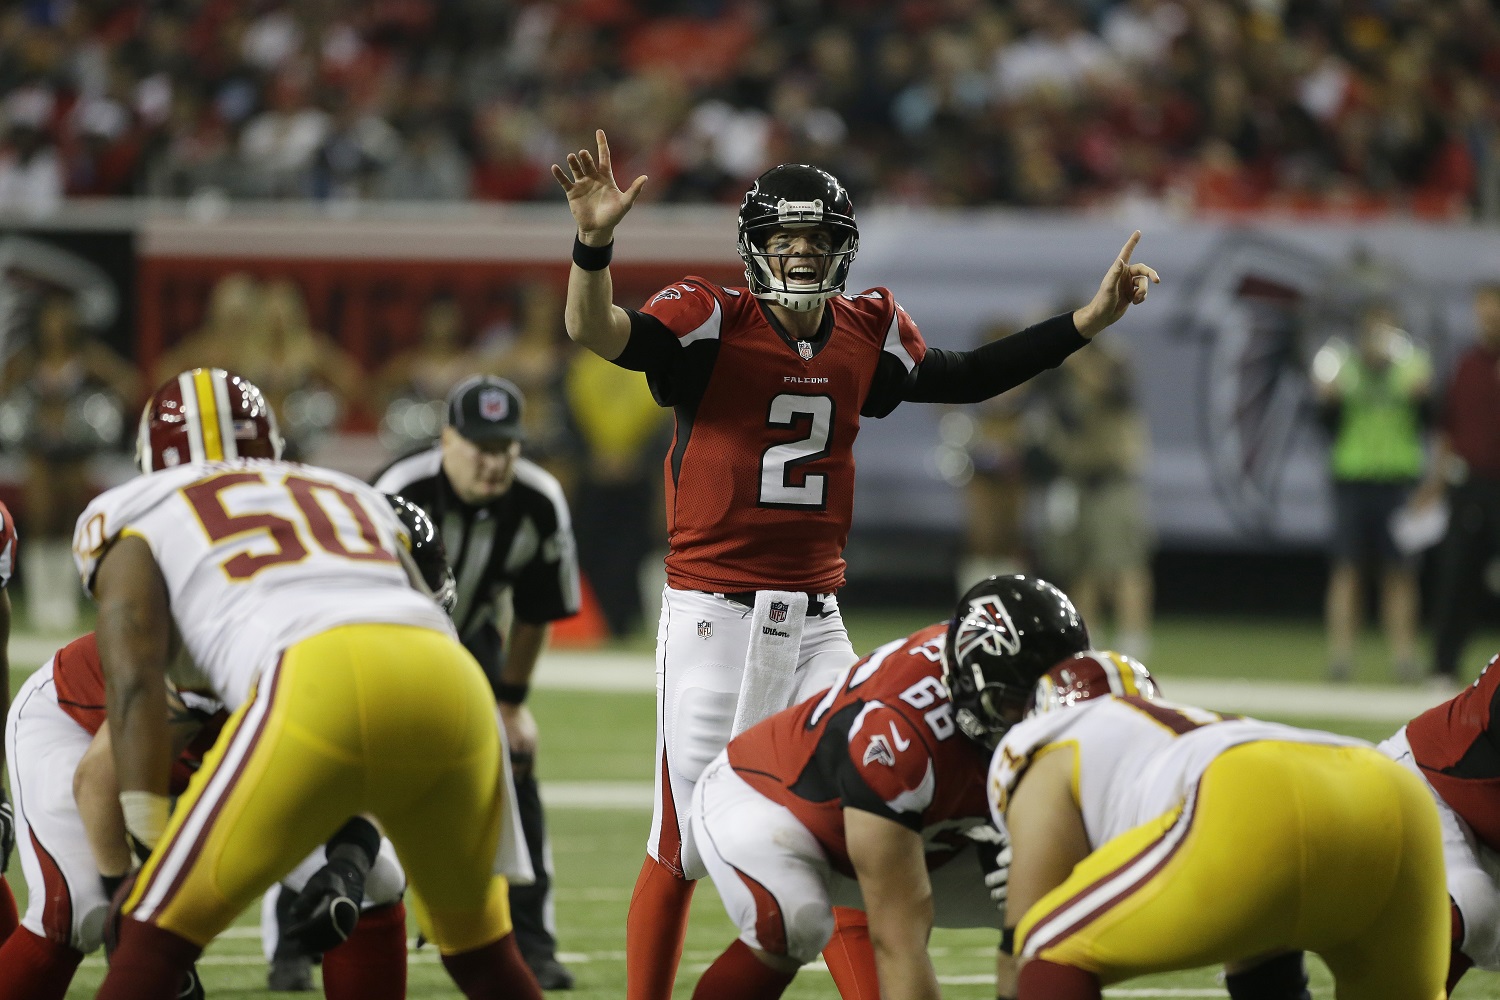 Redskins will see familiar faces on undefeated Falcons